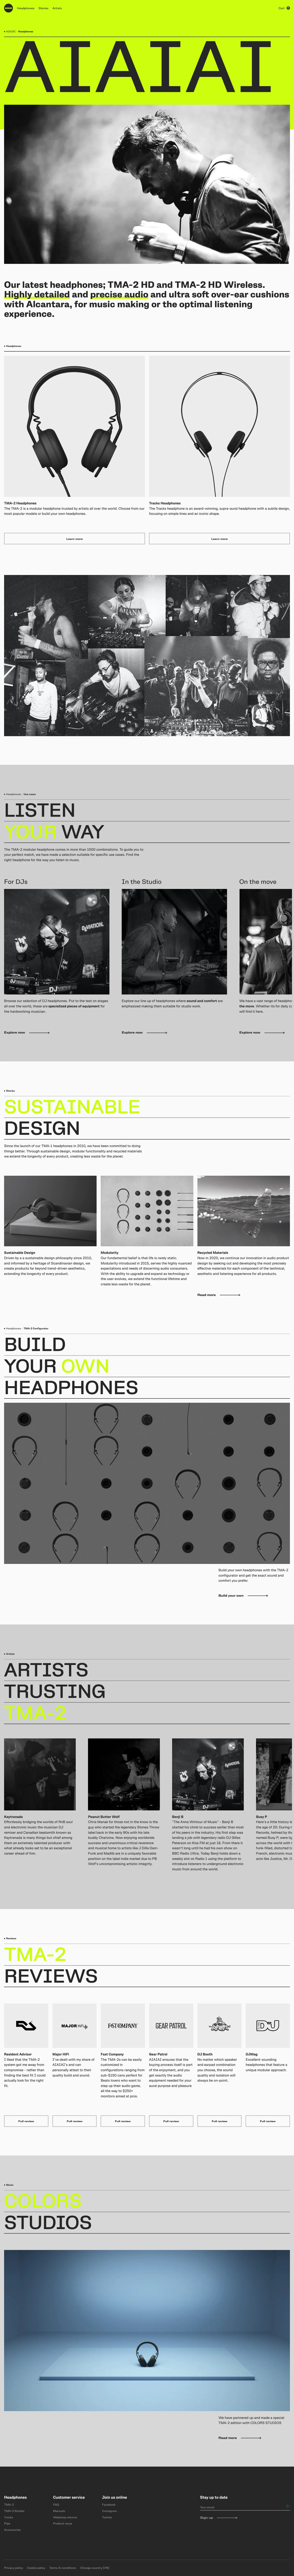 AIAIAI Audio Landing Page Example: AIAIAI is an audio design company dedicated to developing high quality audio products for everyday use. AIAIAI’s modern, minimalist headphones and earphones deliver clear, amplified sound. Headquartered in Copenhagen, AIAIAI is proud to contribute to Denmark’s worldwide reputation as leader in acoustic and electro-acoustic design and engineering.